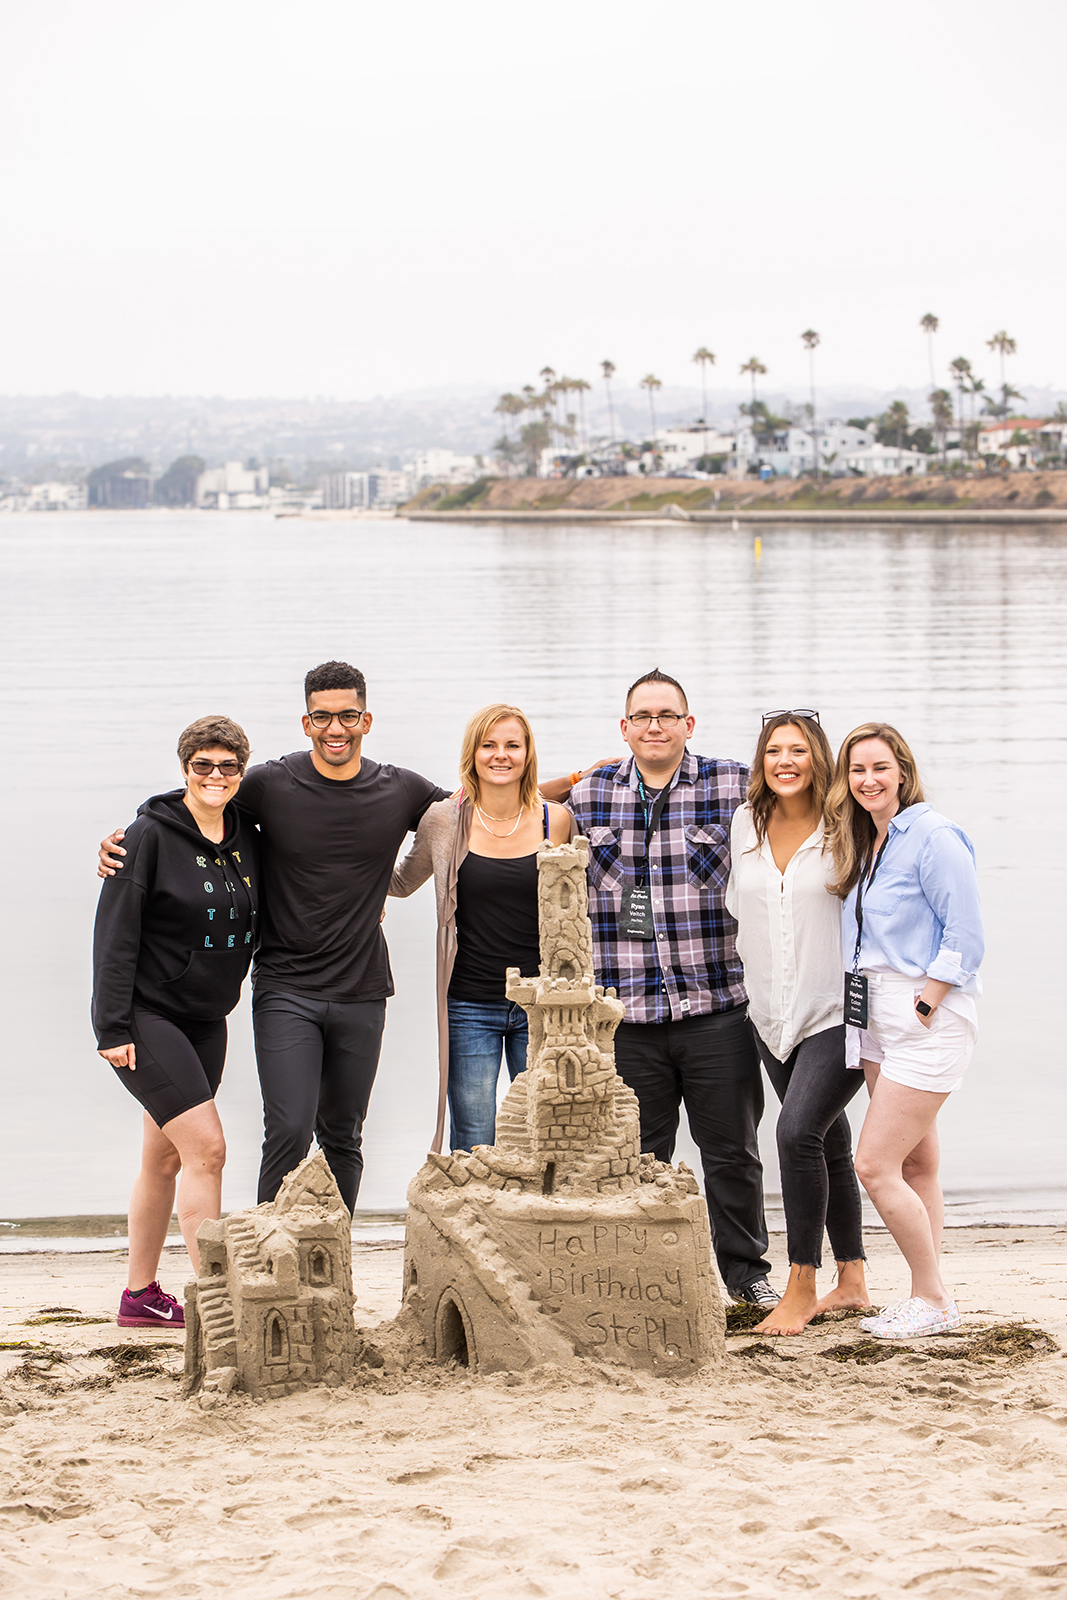 Tagboard Company Retreat trip to San Diego California in August 2022